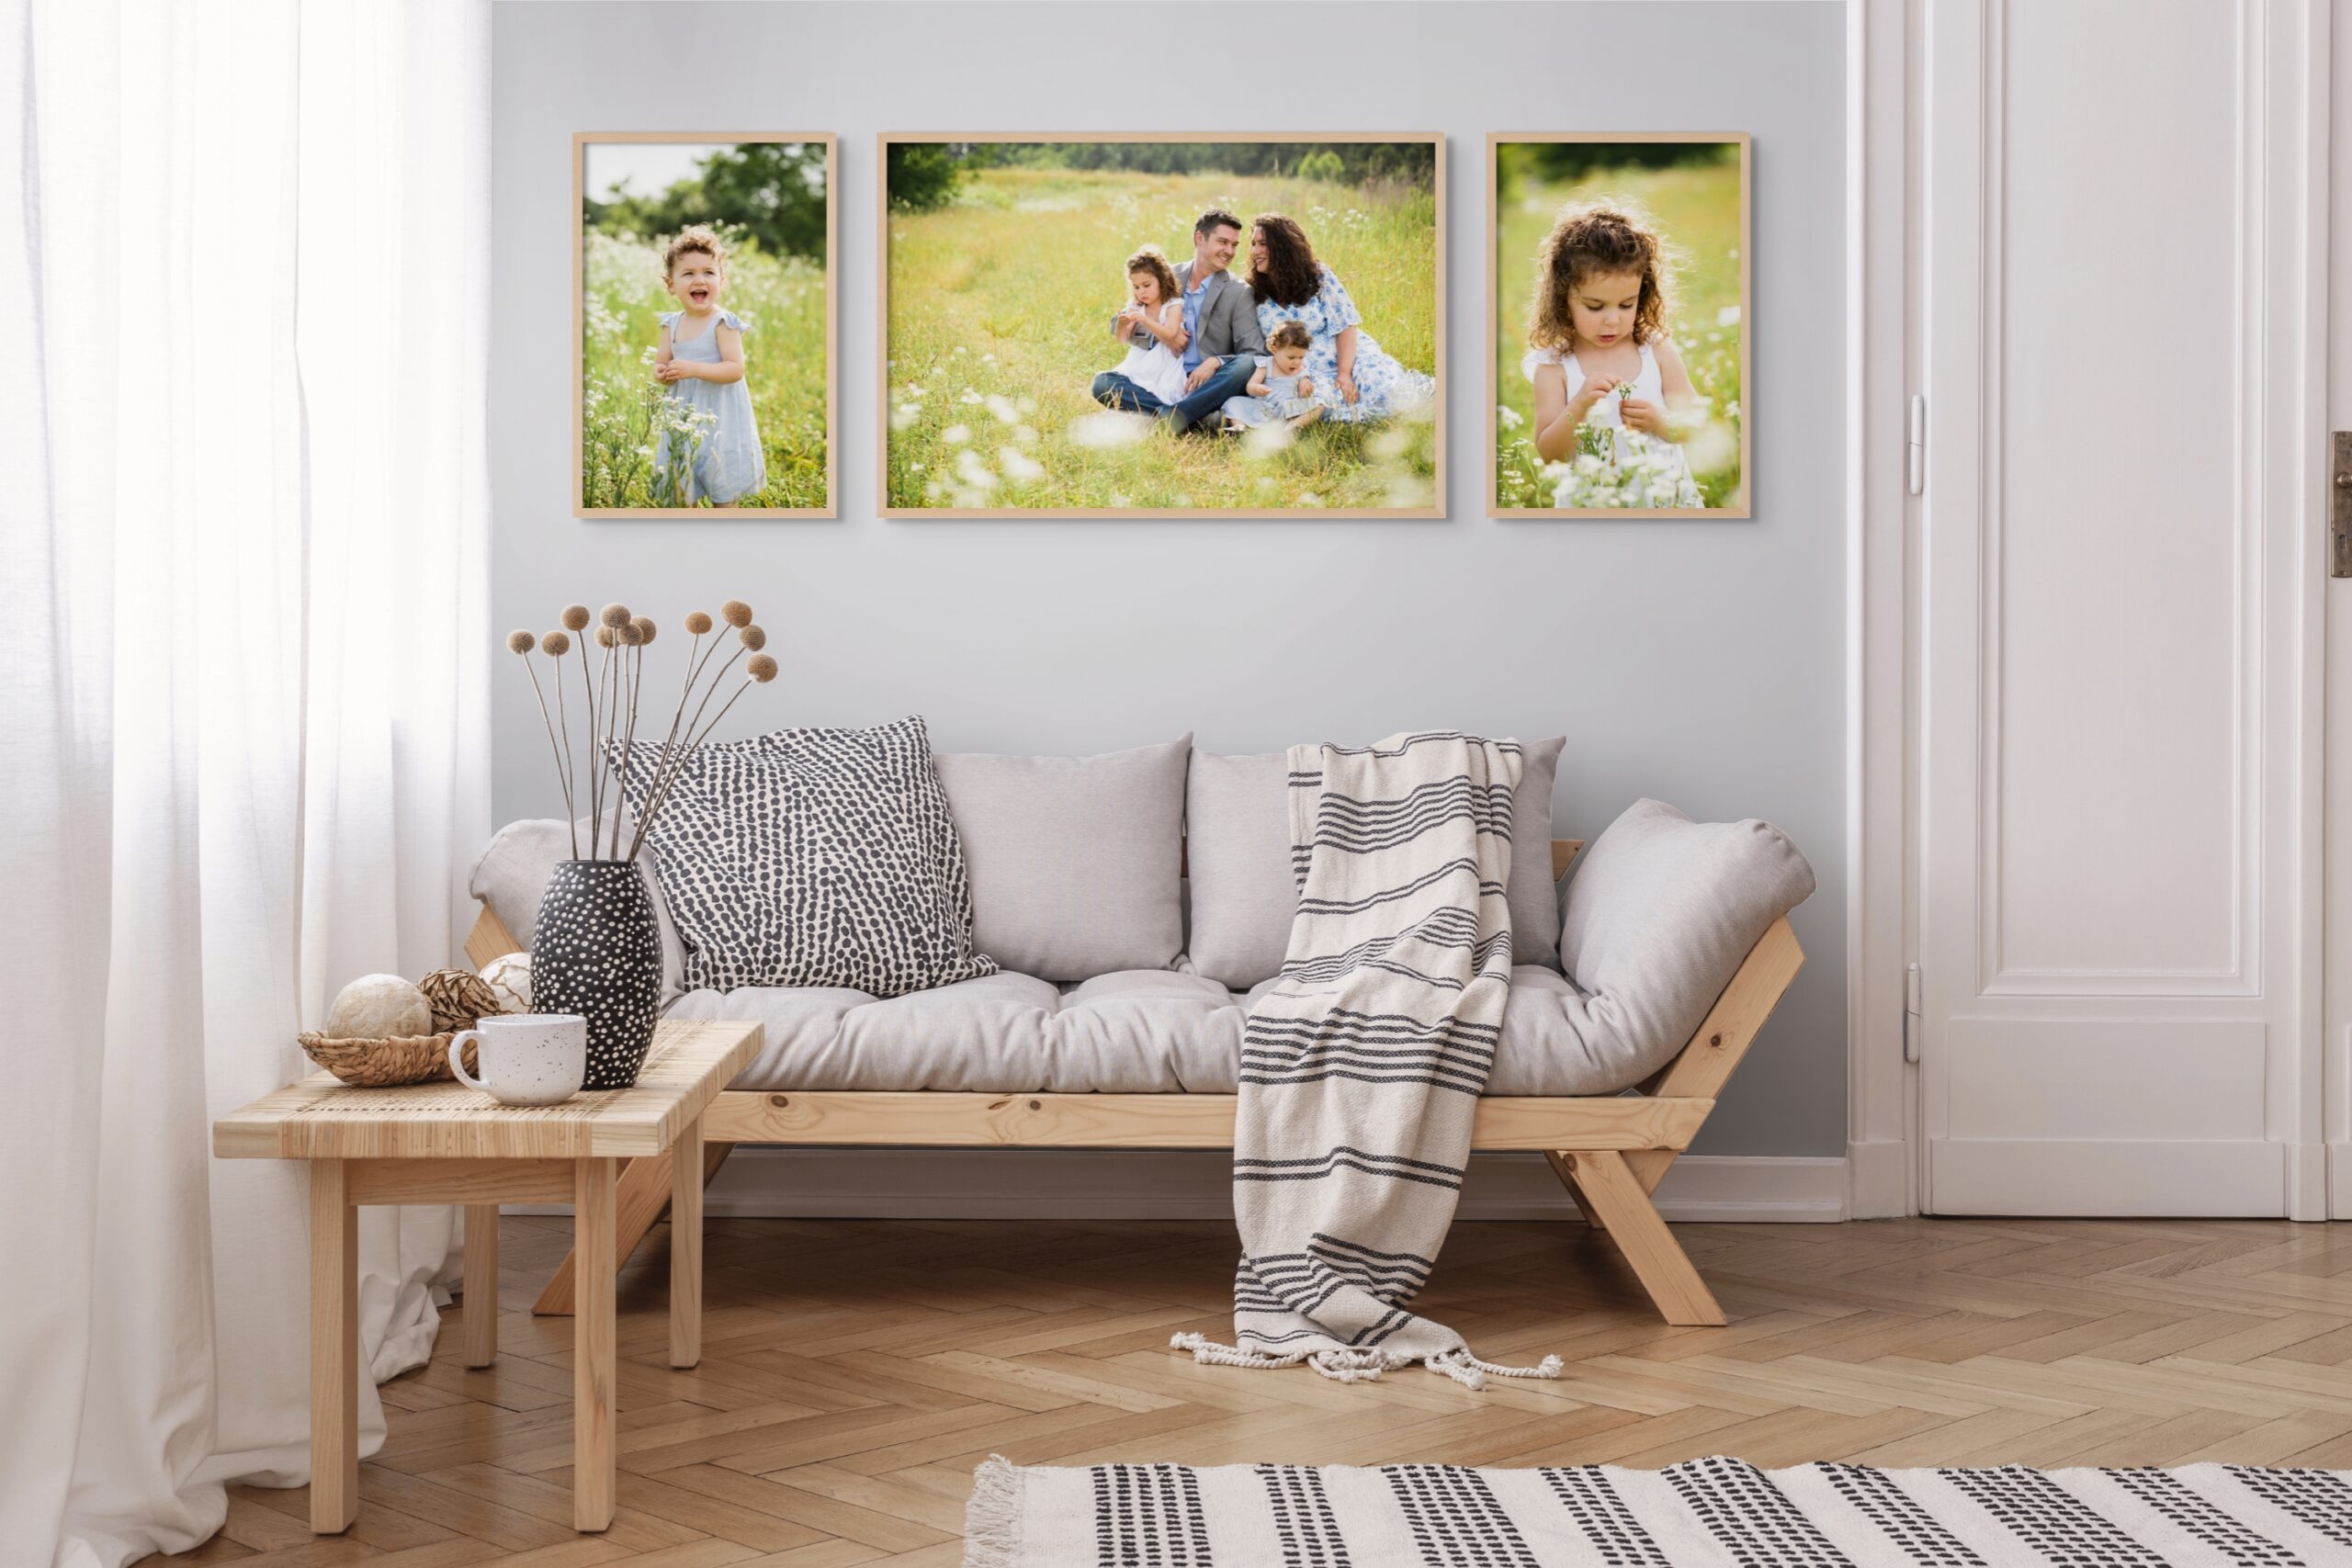 perryville newborn photographer, living room, family pictures on wall, modern room